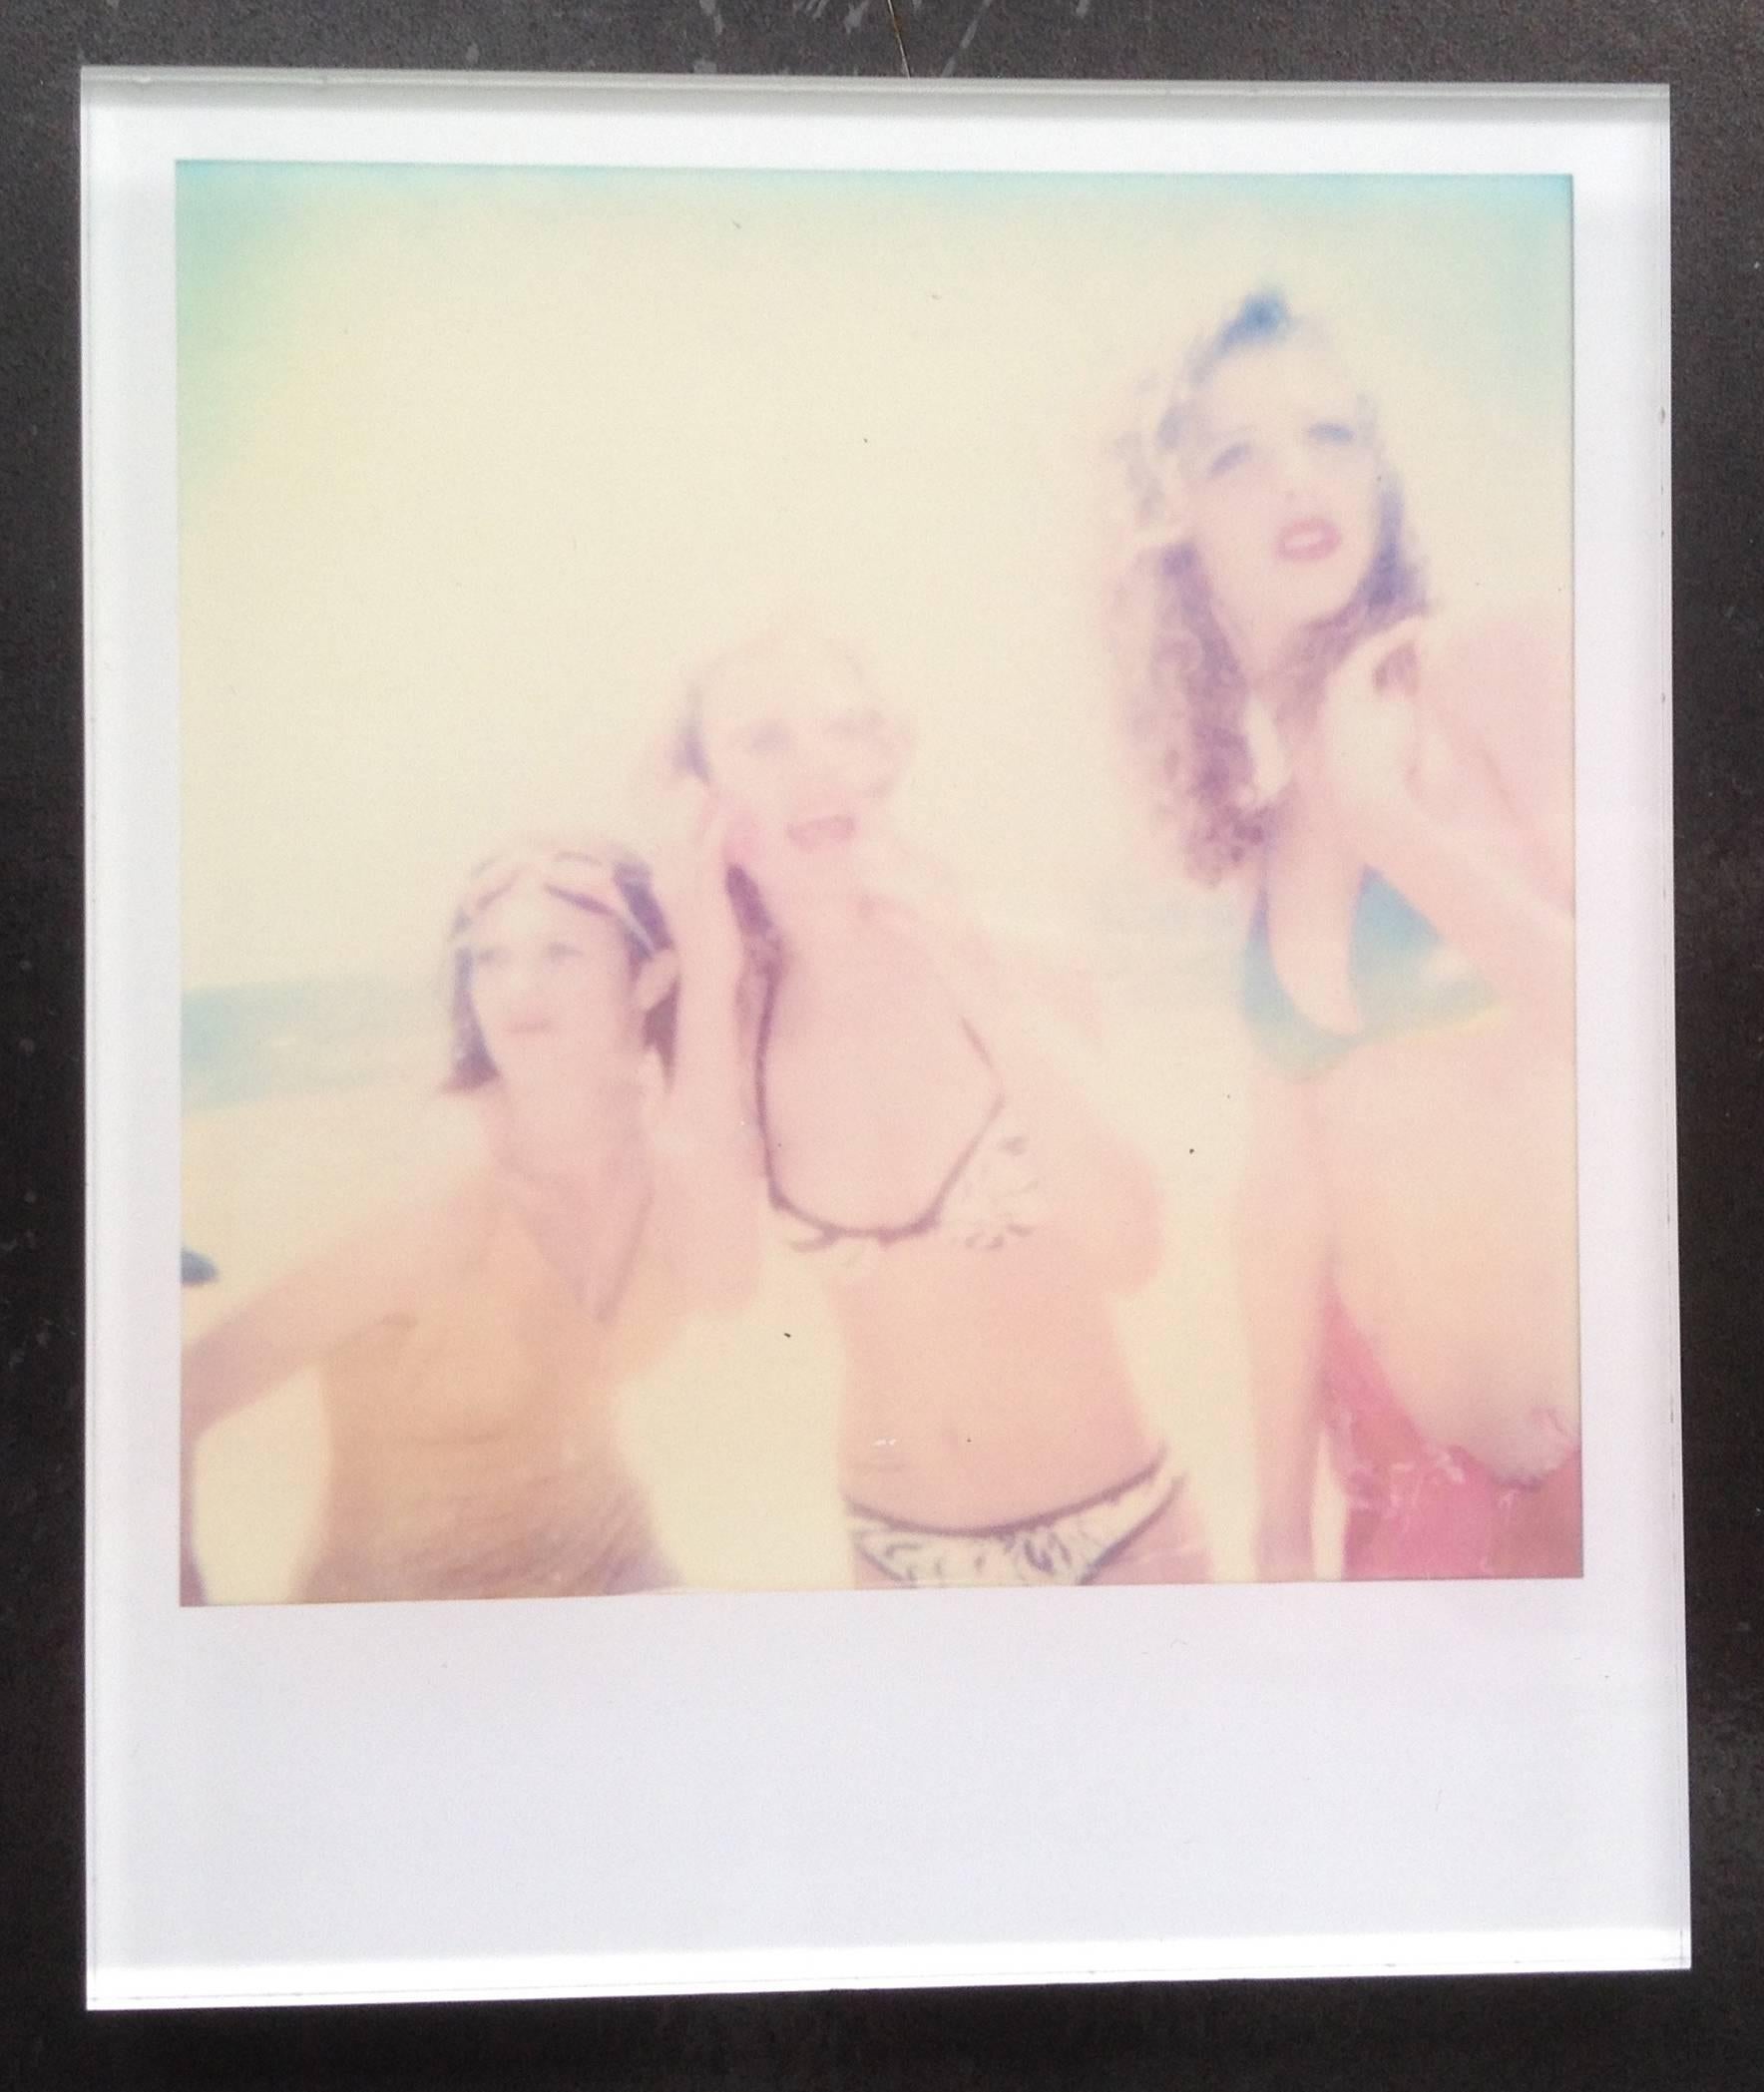 Stefanie Schneider's Minis
'Untitled #2' (Beachshoot) featuring Radha Mitchell, 2005
signed and signature brand on verso
Lambda digital Color-Print, based on a Polaroid.

Polaroid sized open Editions 1999-2013
10.7 x 8.8cm (Image 7.9x7.7cm)
mounted: